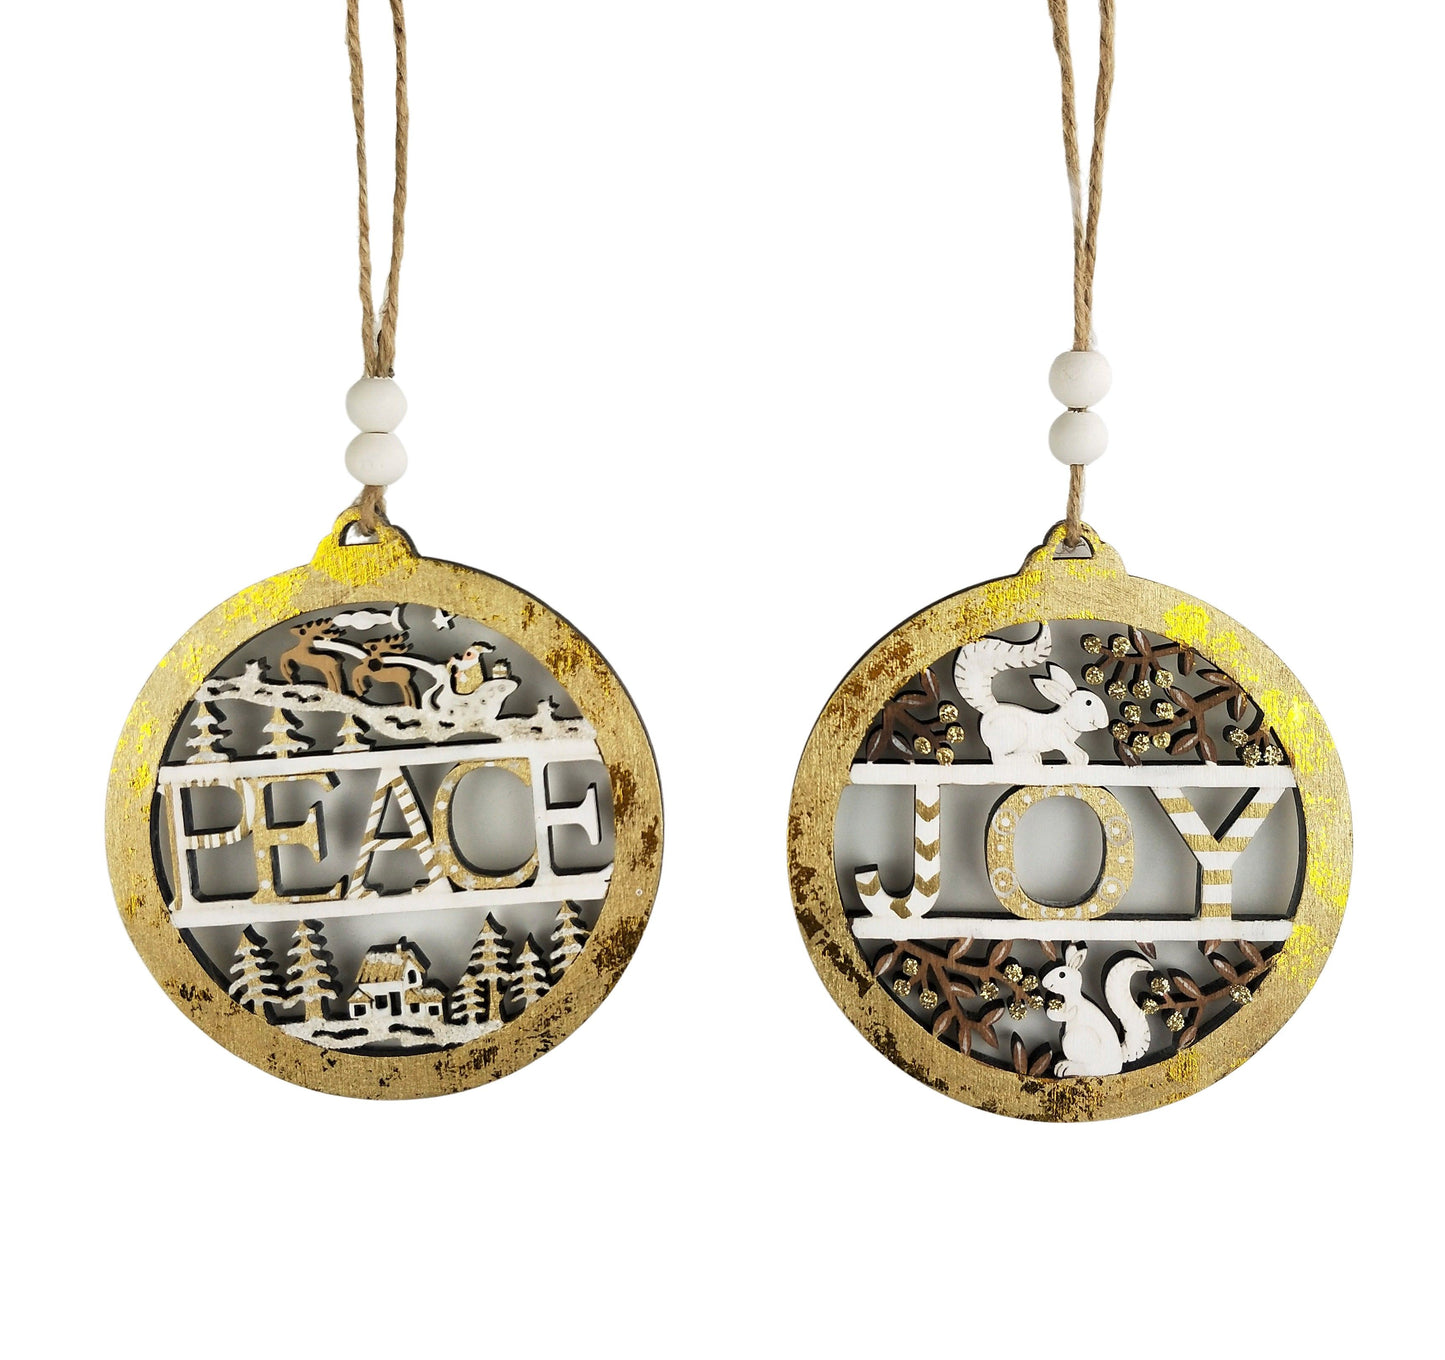 Joy and Peace Baubles Hanging Decoration